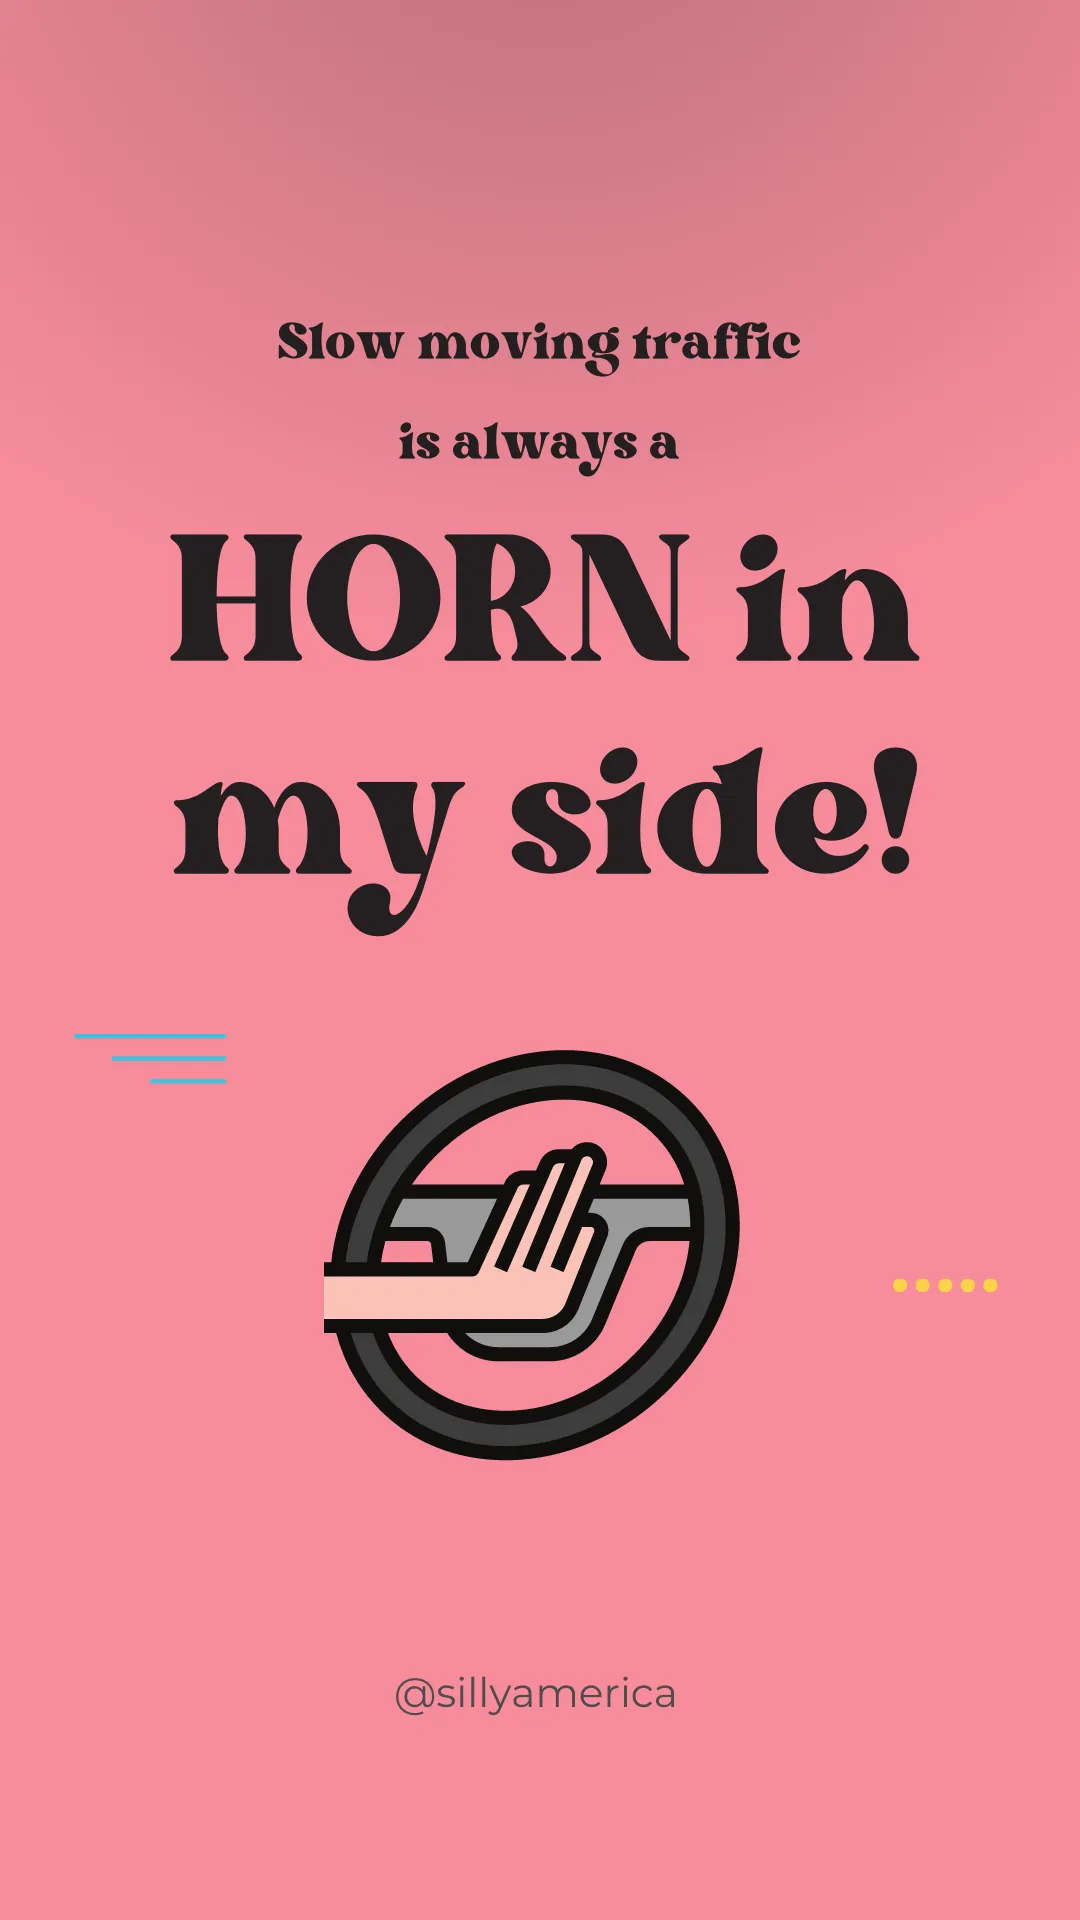 Slow moving traffic is always a HORN in my side! - Road Trip Puns